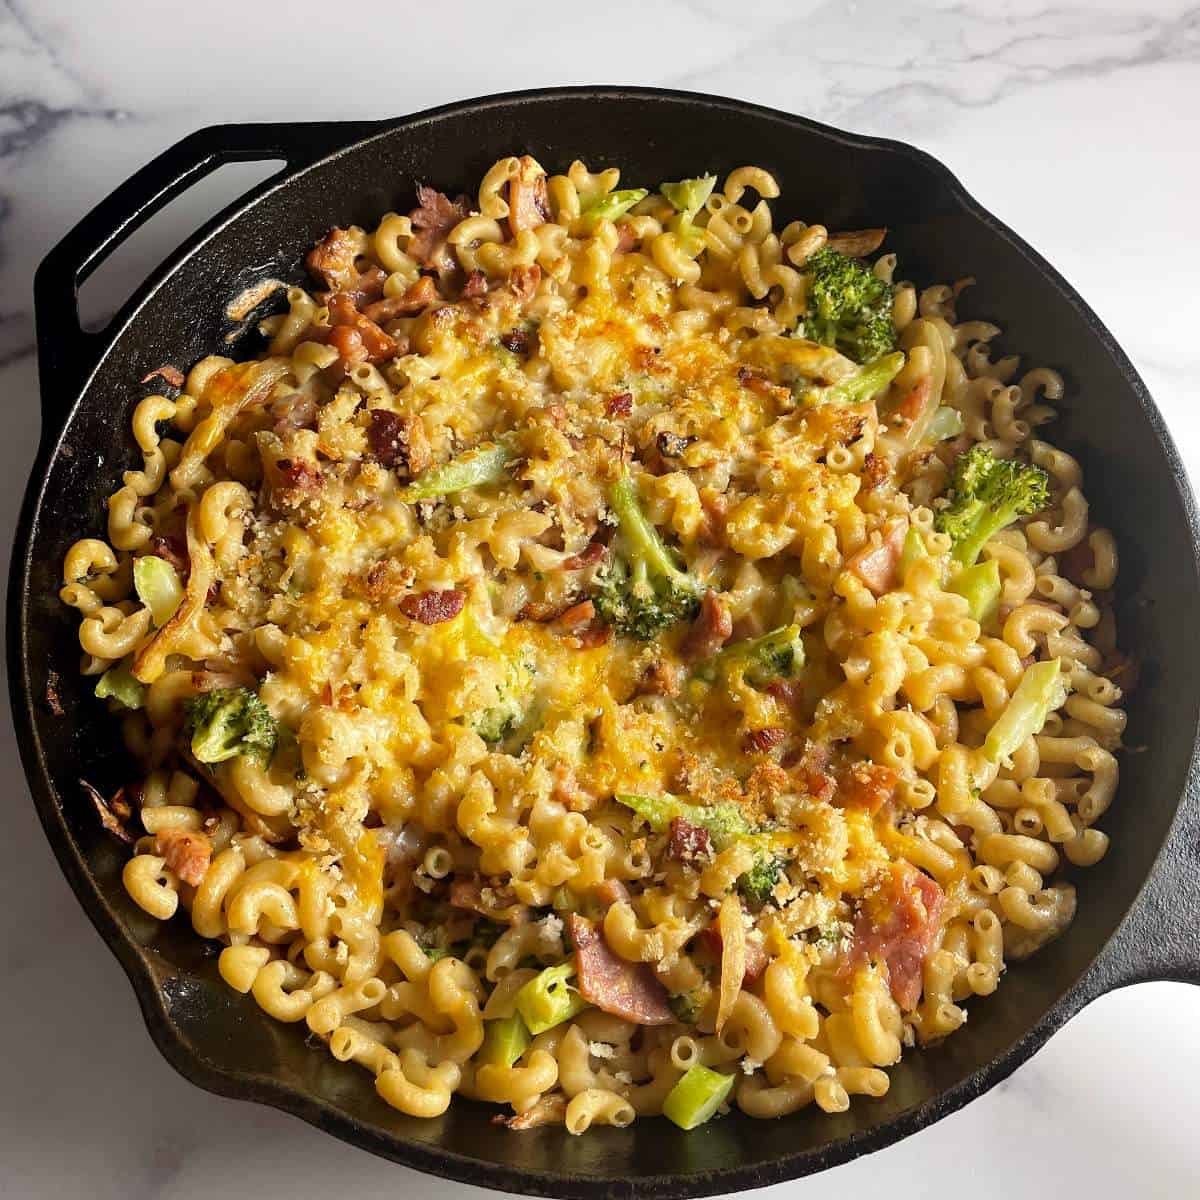 ham and cheese pasta bake in a black skillet.